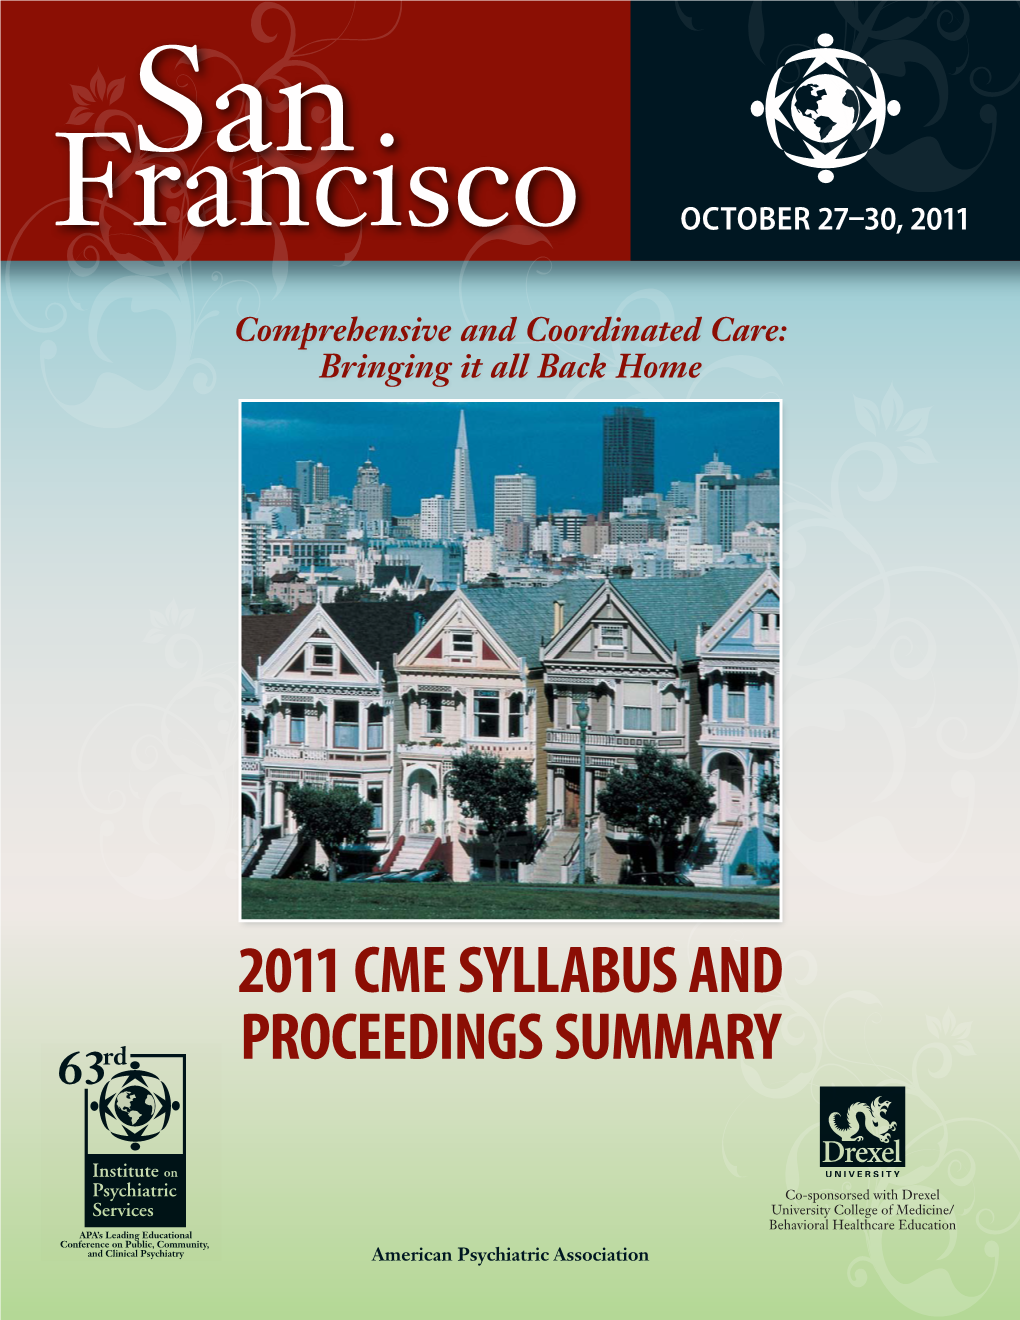 2011 CME SYLLABUS and PROCEEDINGS SUMMARY for the 63Rd Institute on Psychiatric Services October 27-30, 2011 San Francisco, California